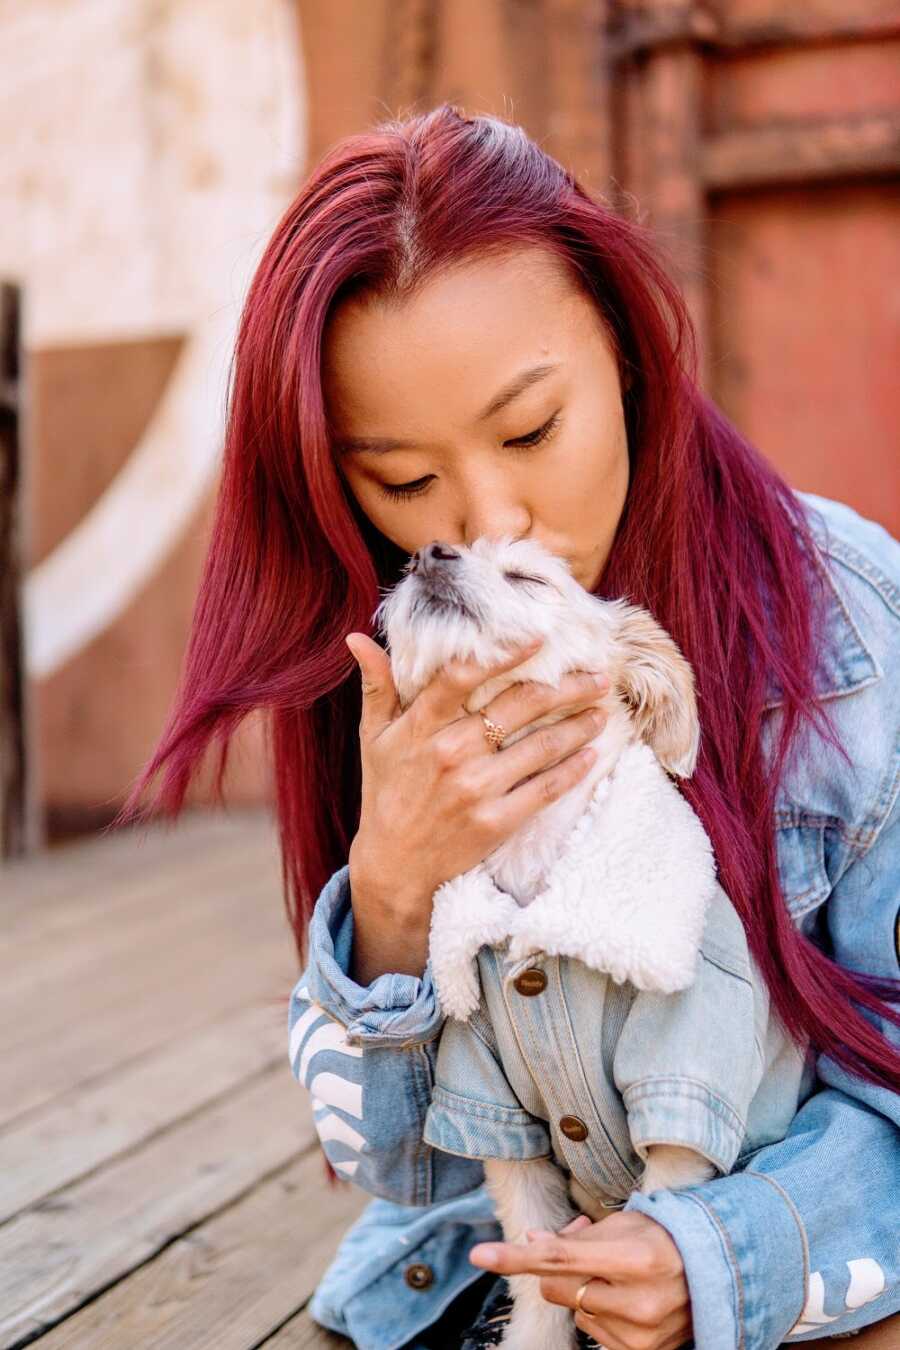 Woman with cerebral palsy kisses a small dog